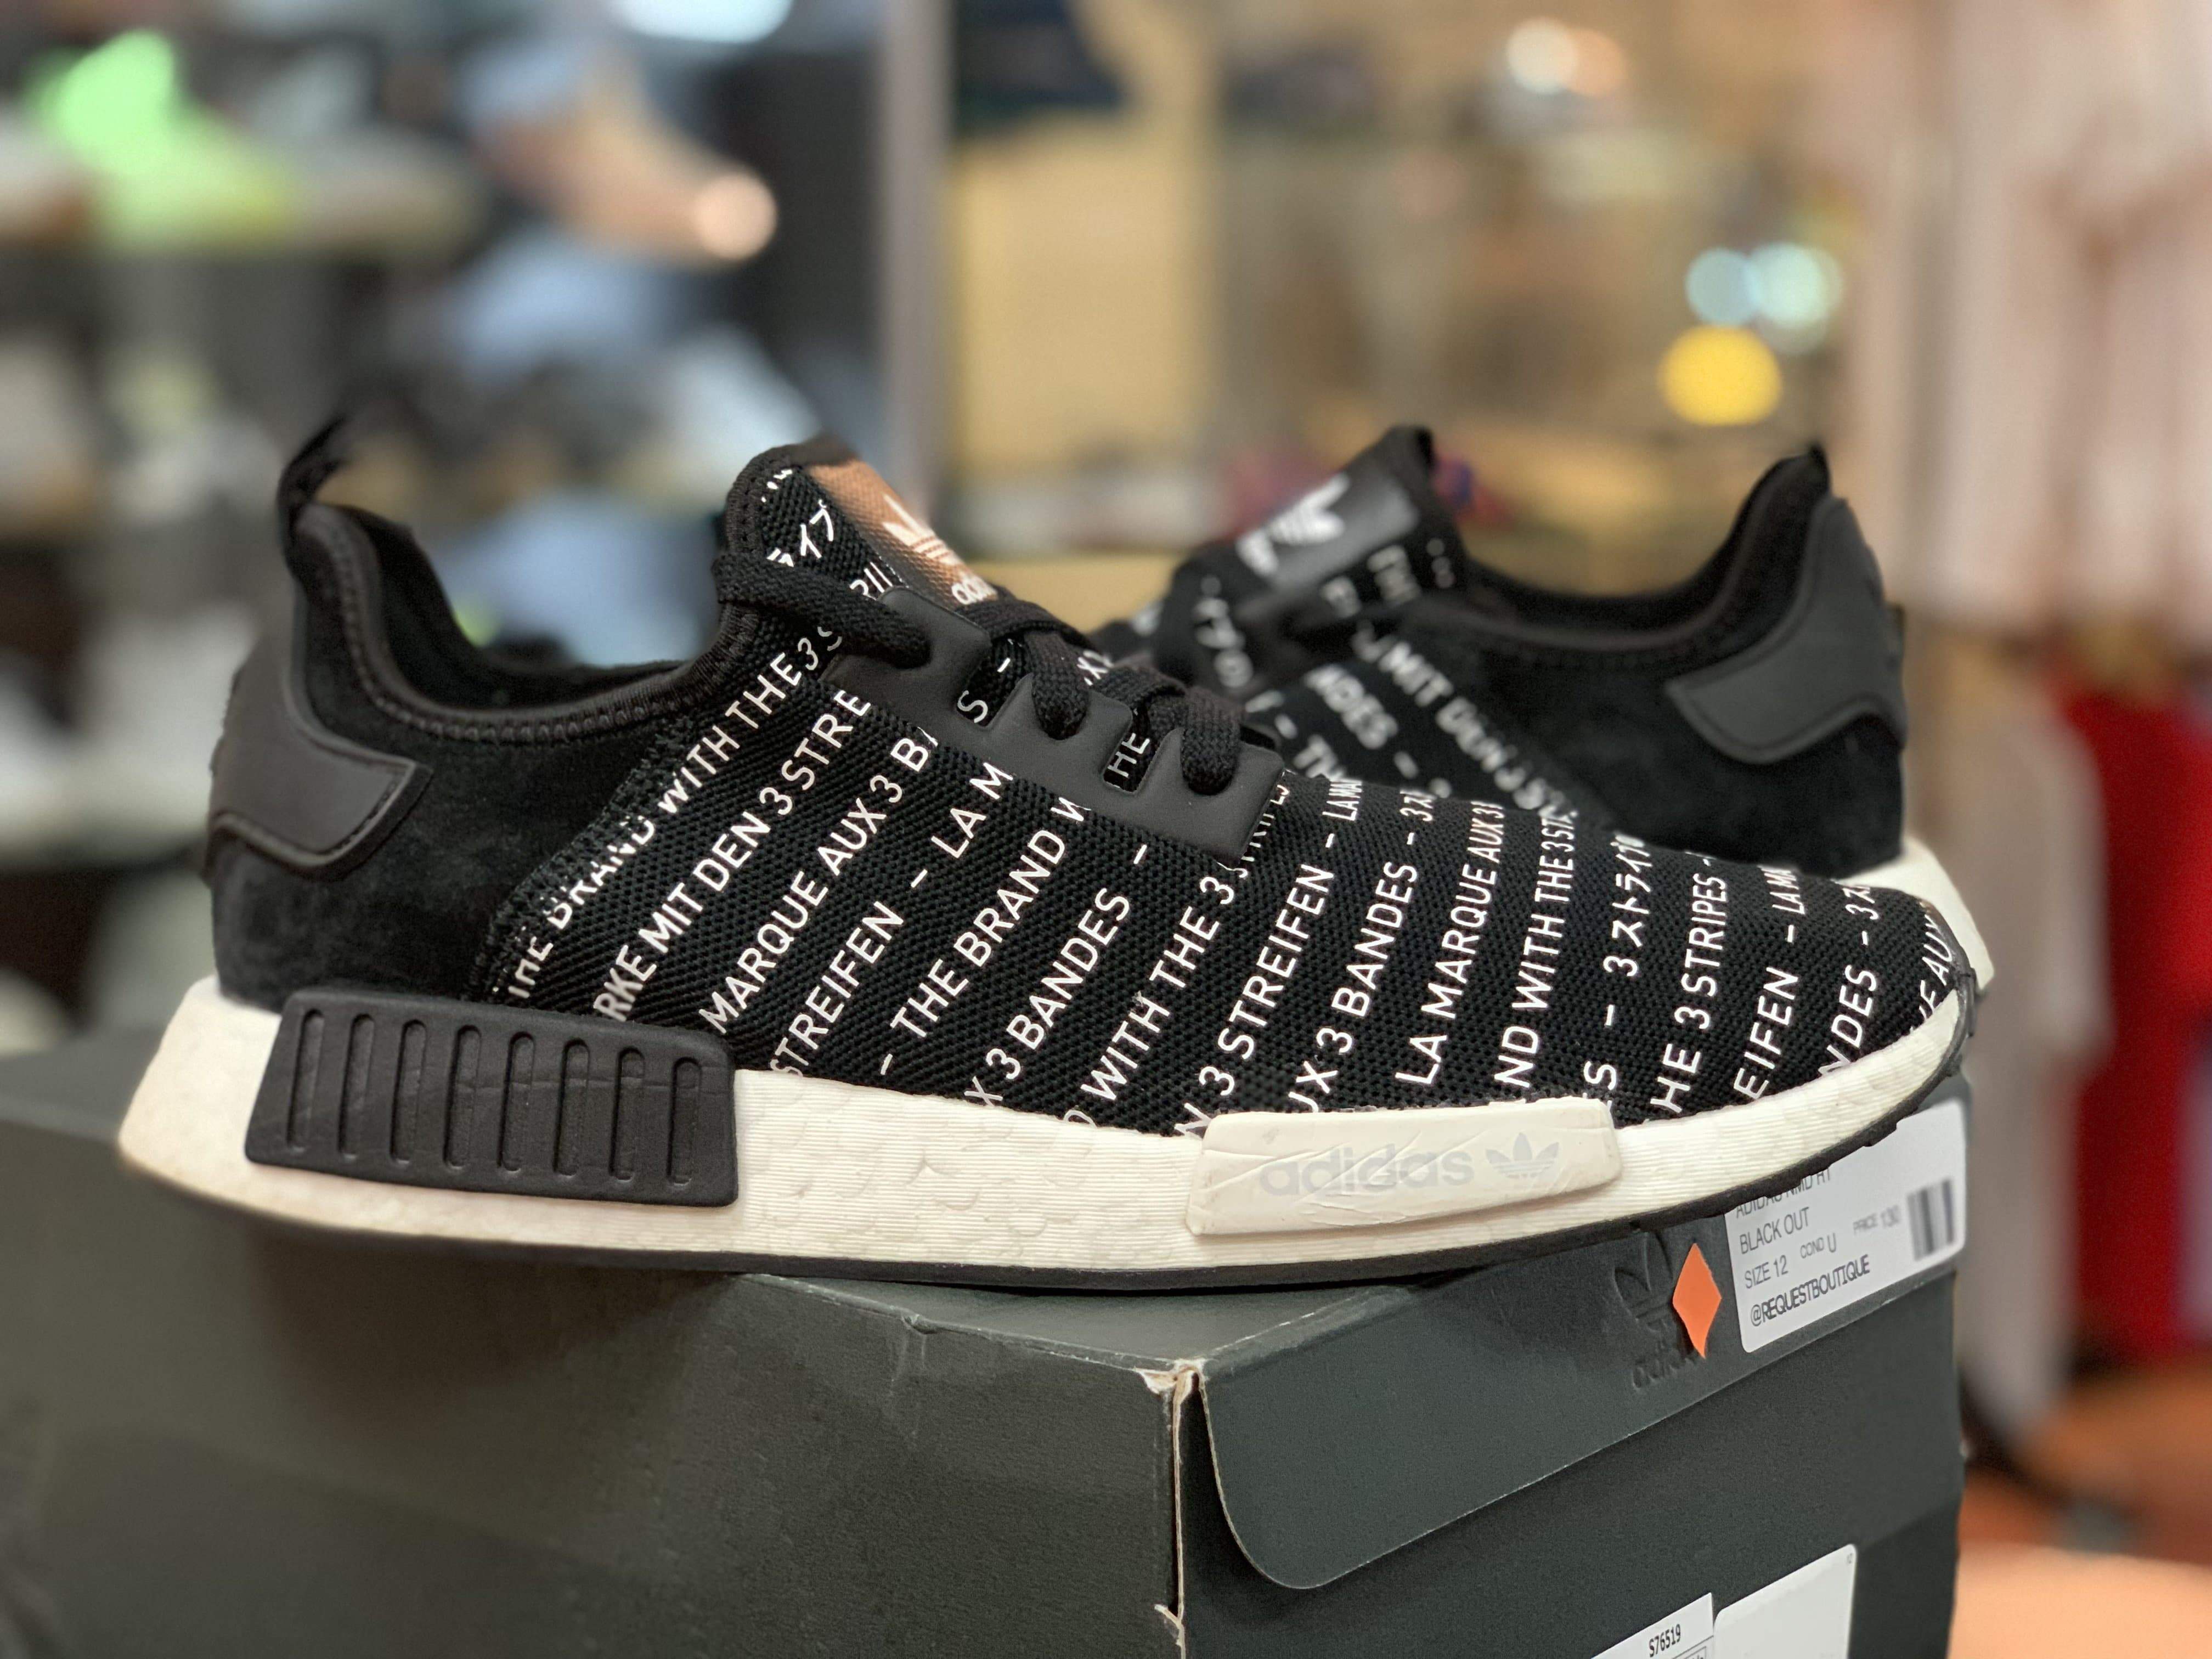 Adidas NMD R1 “Black Out”